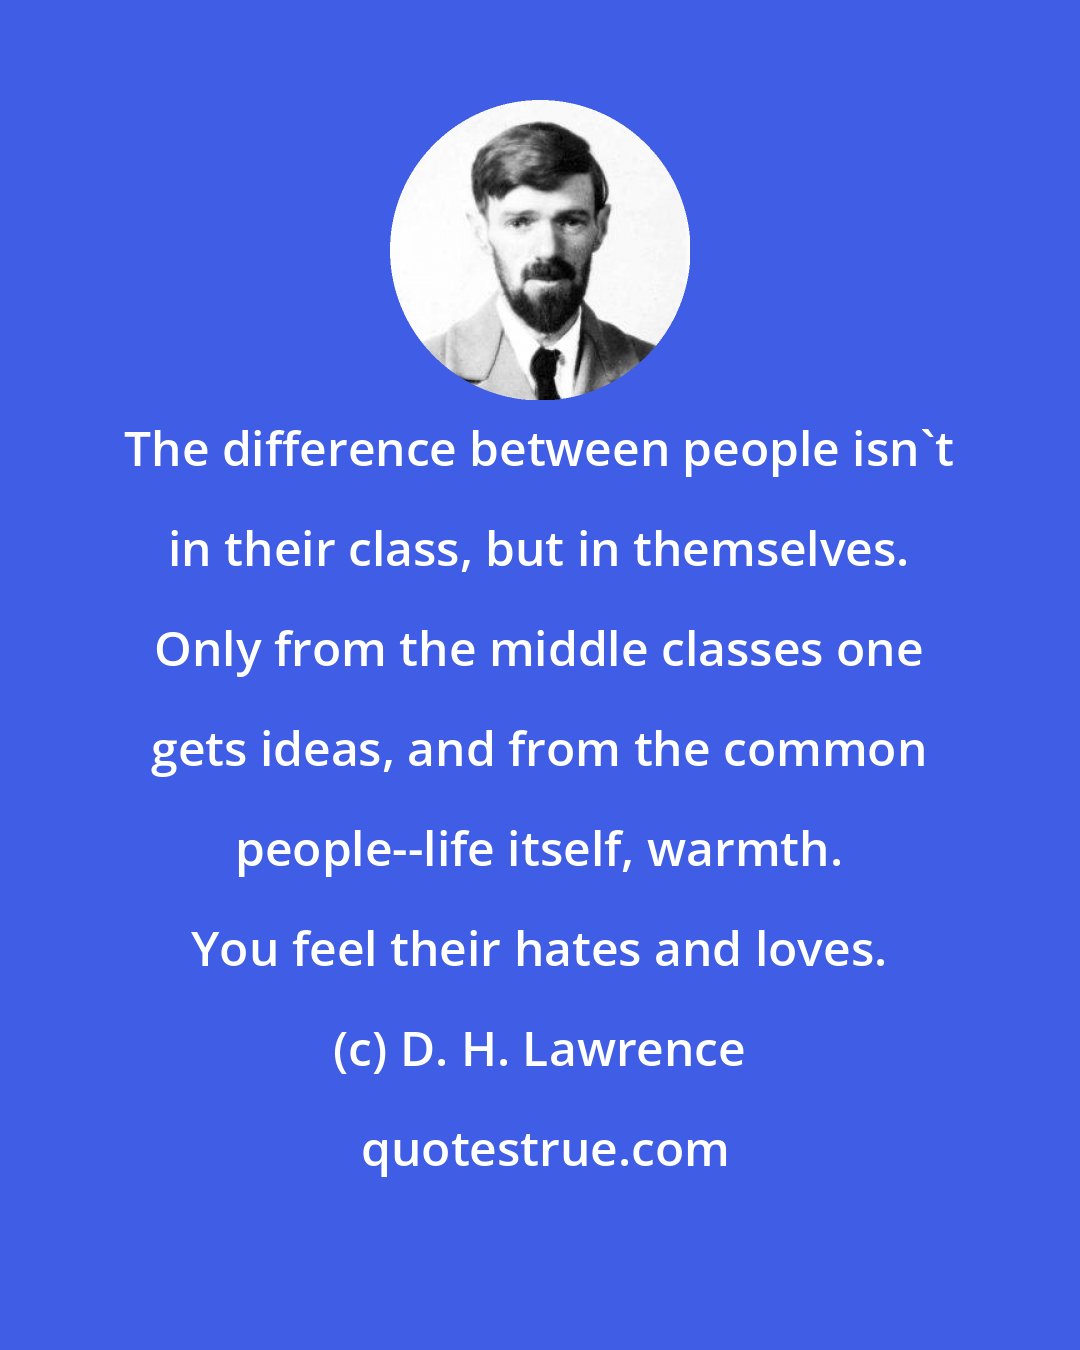 D. H. Lawrence: The difference between people isn't in their class, but in themselves. Only from the middle classes one gets ideas, and from the common people--life itself, warmth. You feel their hates and loves.